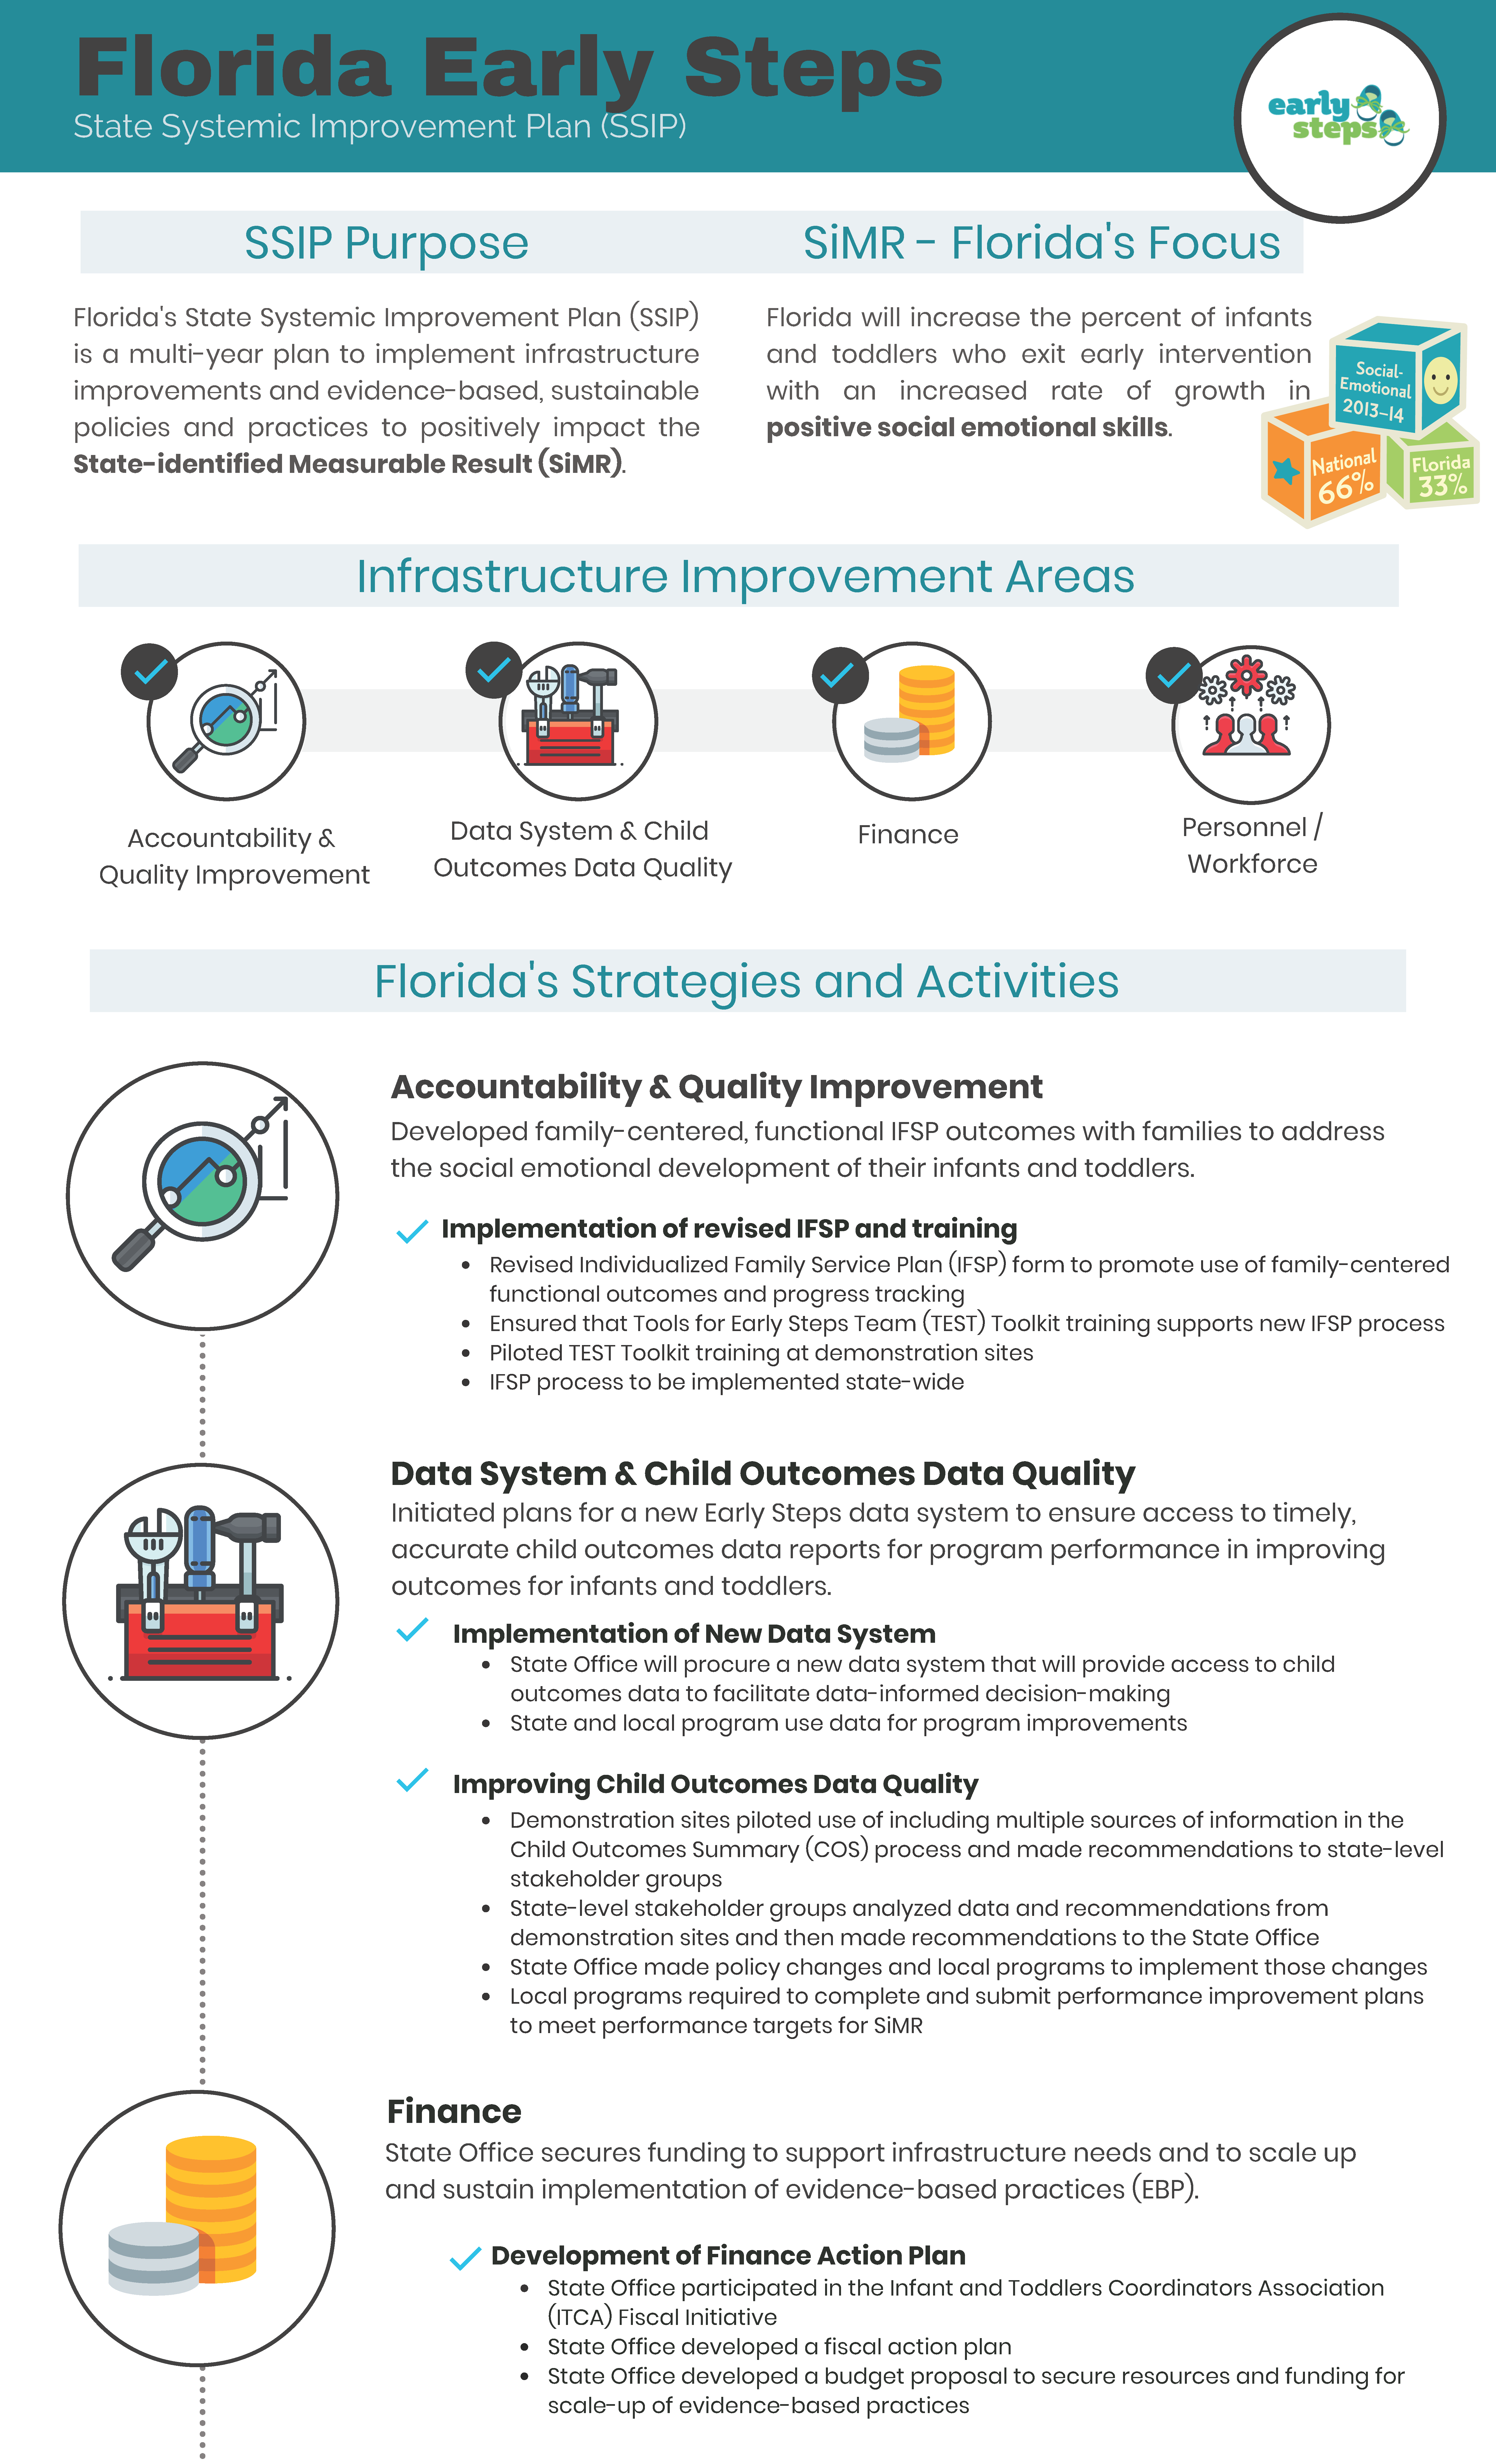 Image of Florida SSIP infographic